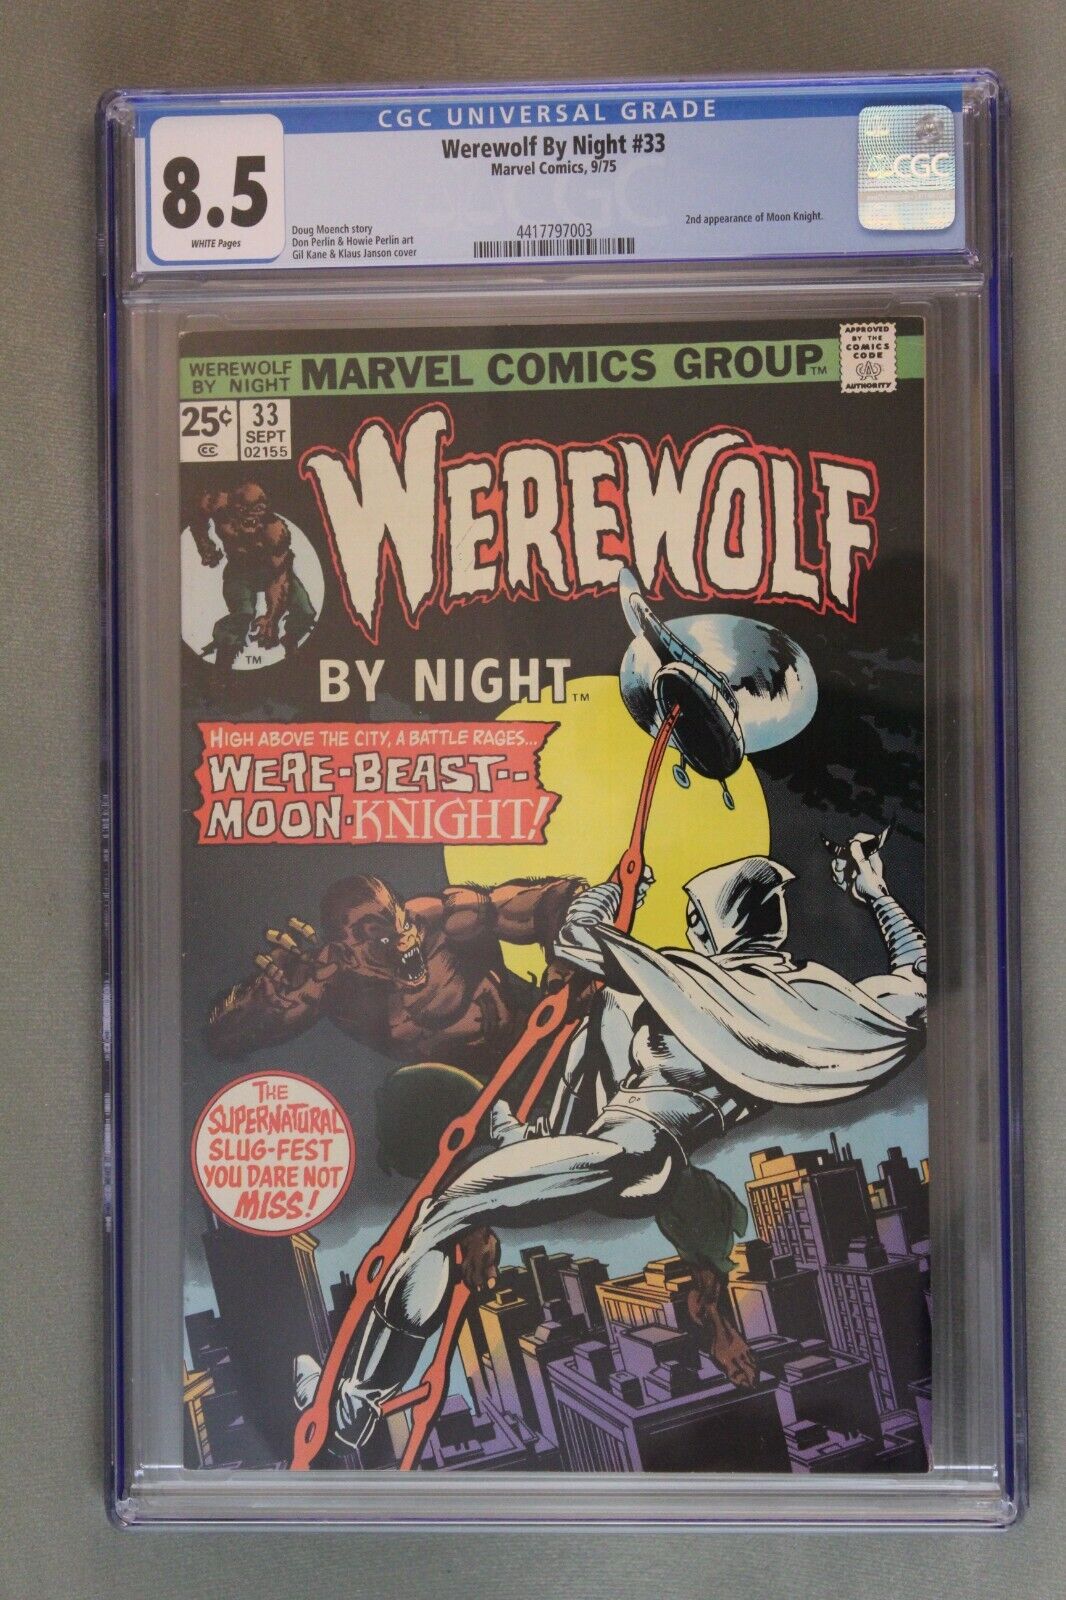 Werewolf By Night #33, 9/75 ~ CGC Graded at 8.5, Gil Kane & Klaus Janson - Cover